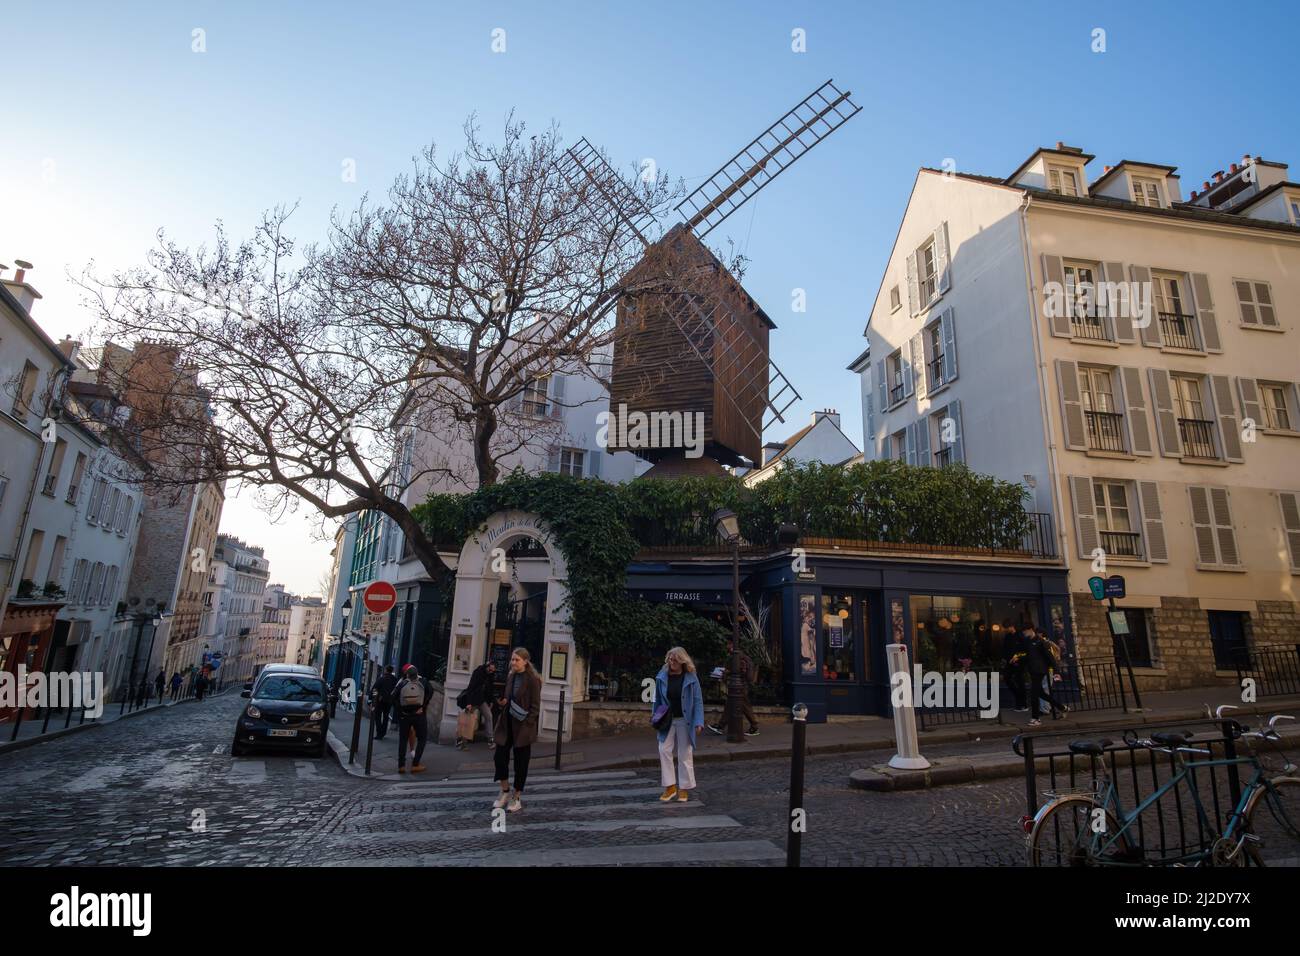 Paris, France - March 22, 2022 : A French restaurant bar with a windmill at the top in the picturesque area of Montmartre Paris at day time Stock Photo